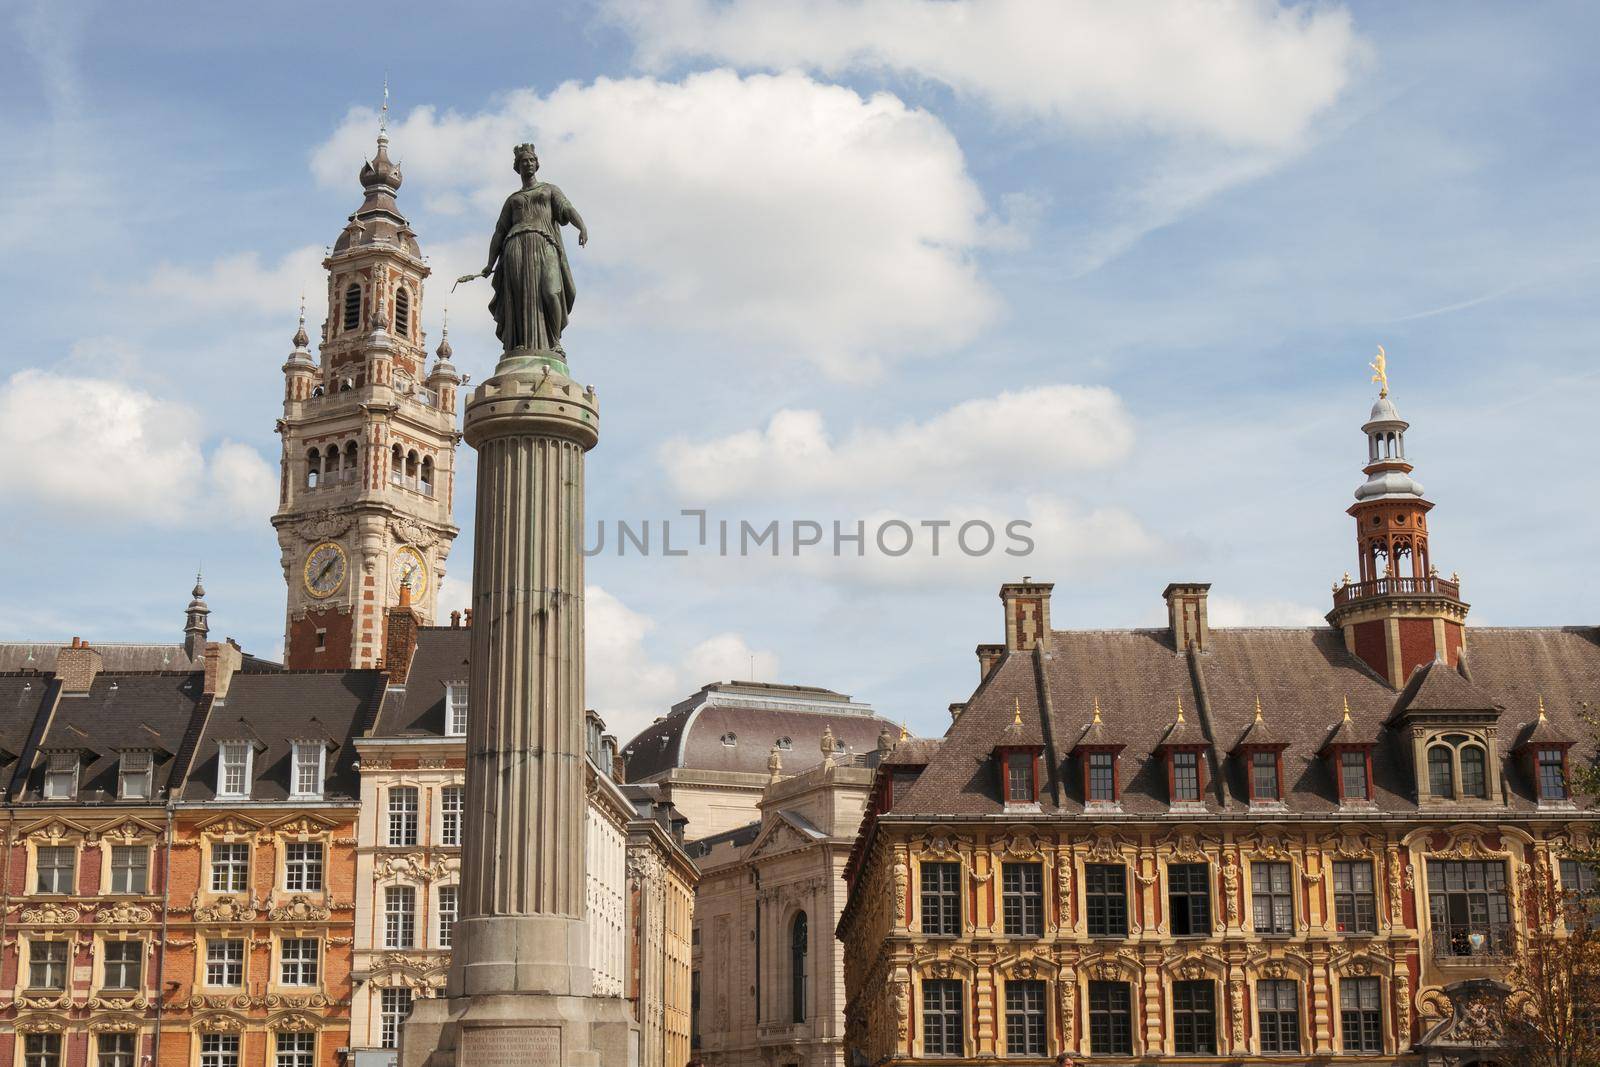 Grand Place in the city of Lille by Tilo